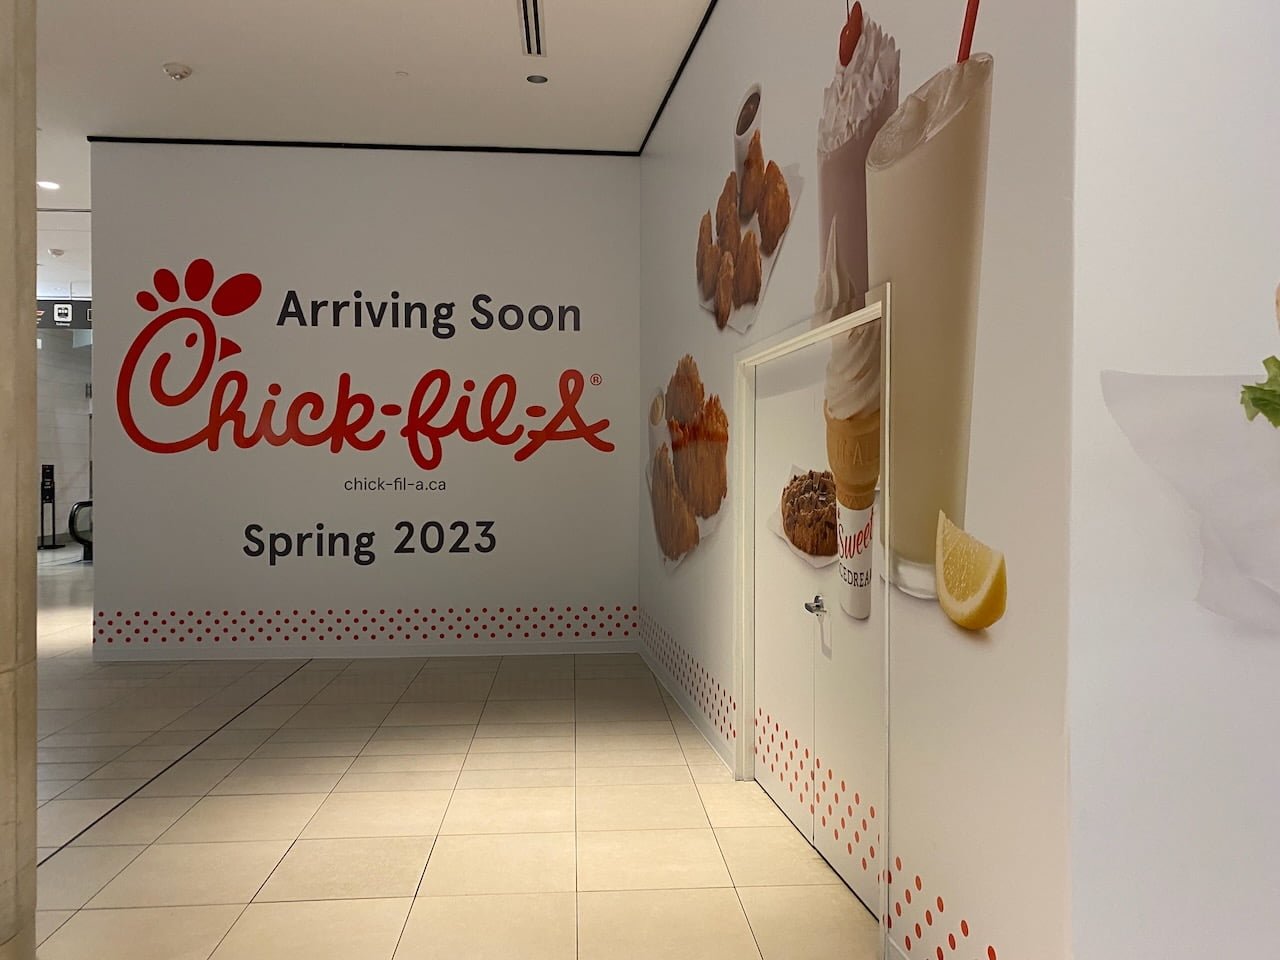 chick-fil-a-to-triple-canadian-footprint-by-2025-with-planned-ongoing-expansion-interview